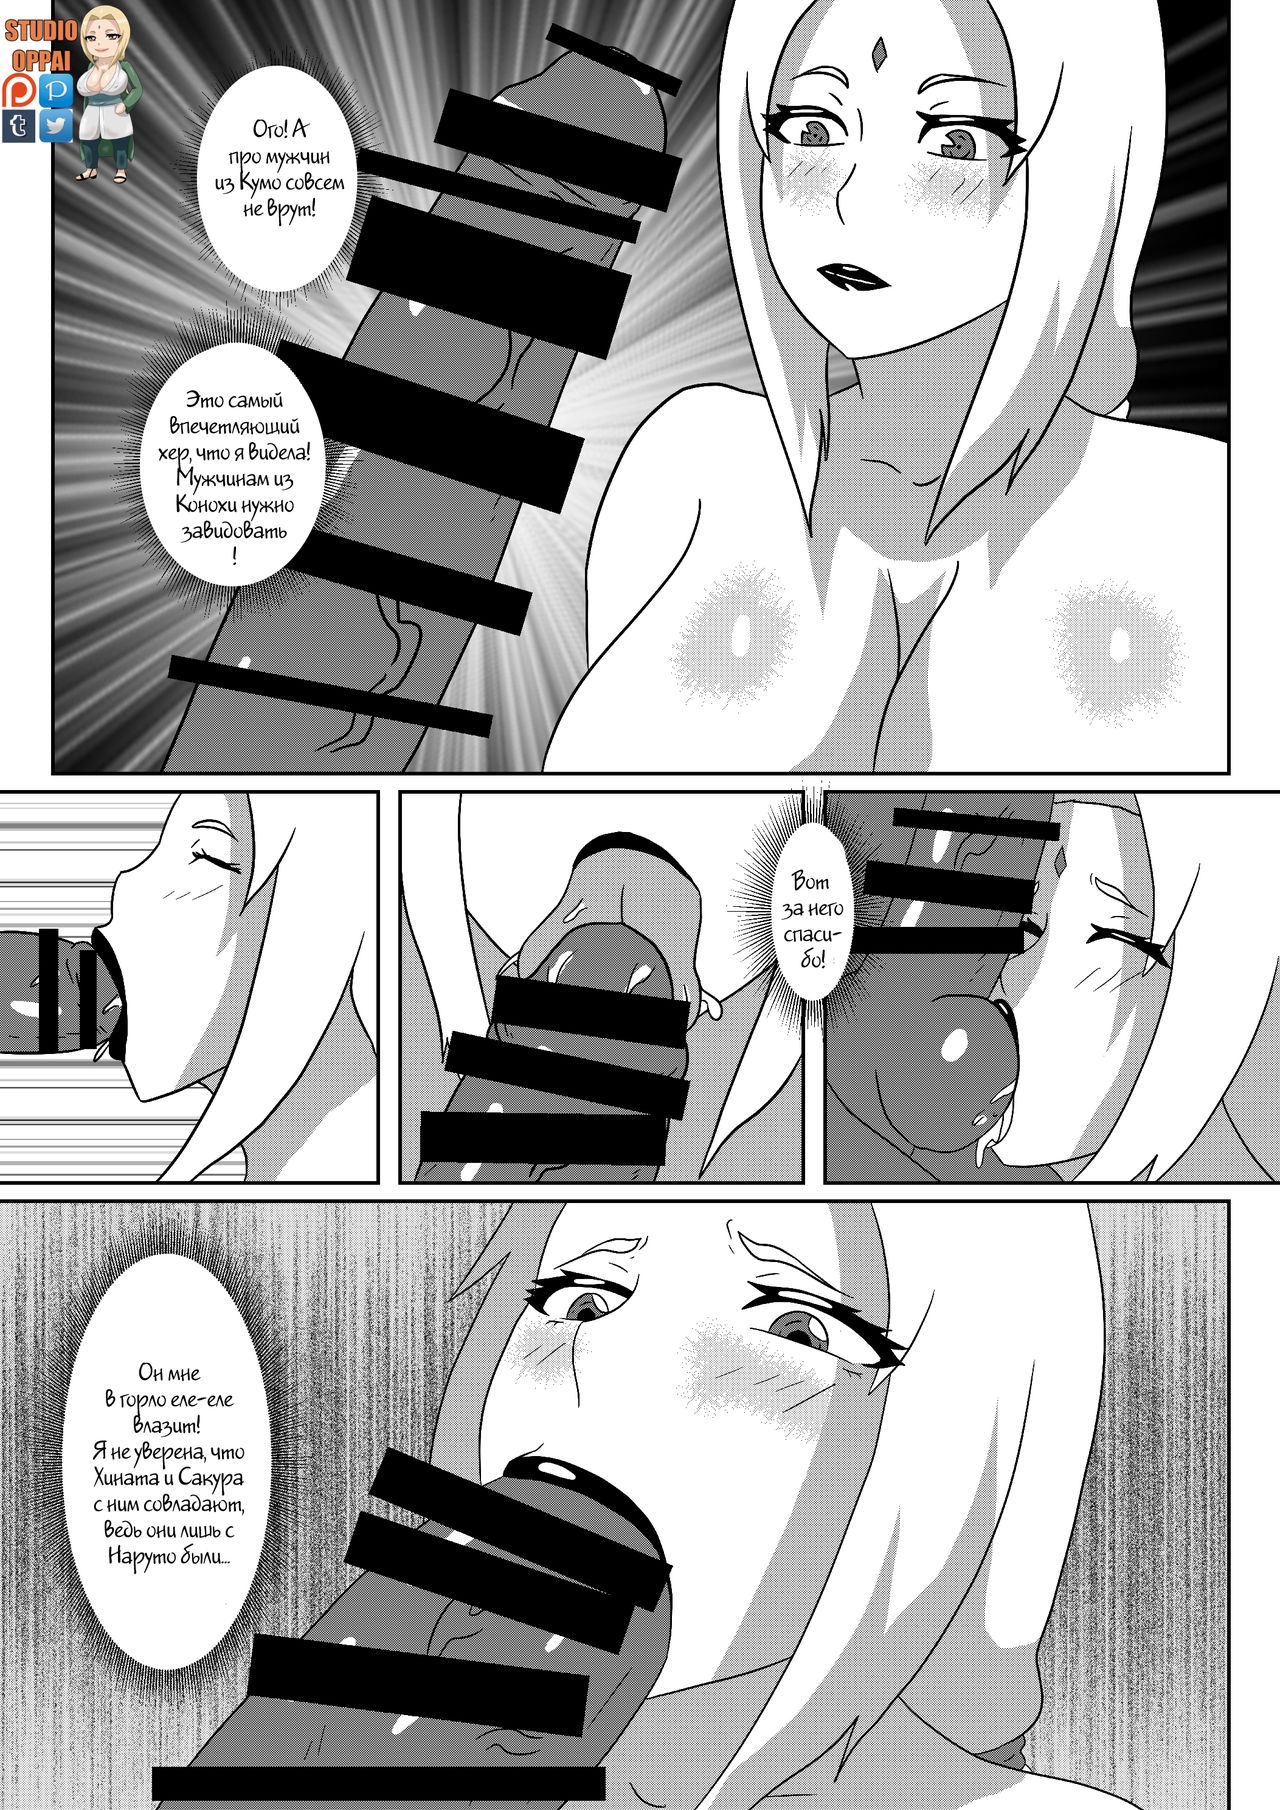 [Studio Oppai] Negotiations with Raikage (Naruto) [Russian] [Witcher000] 2